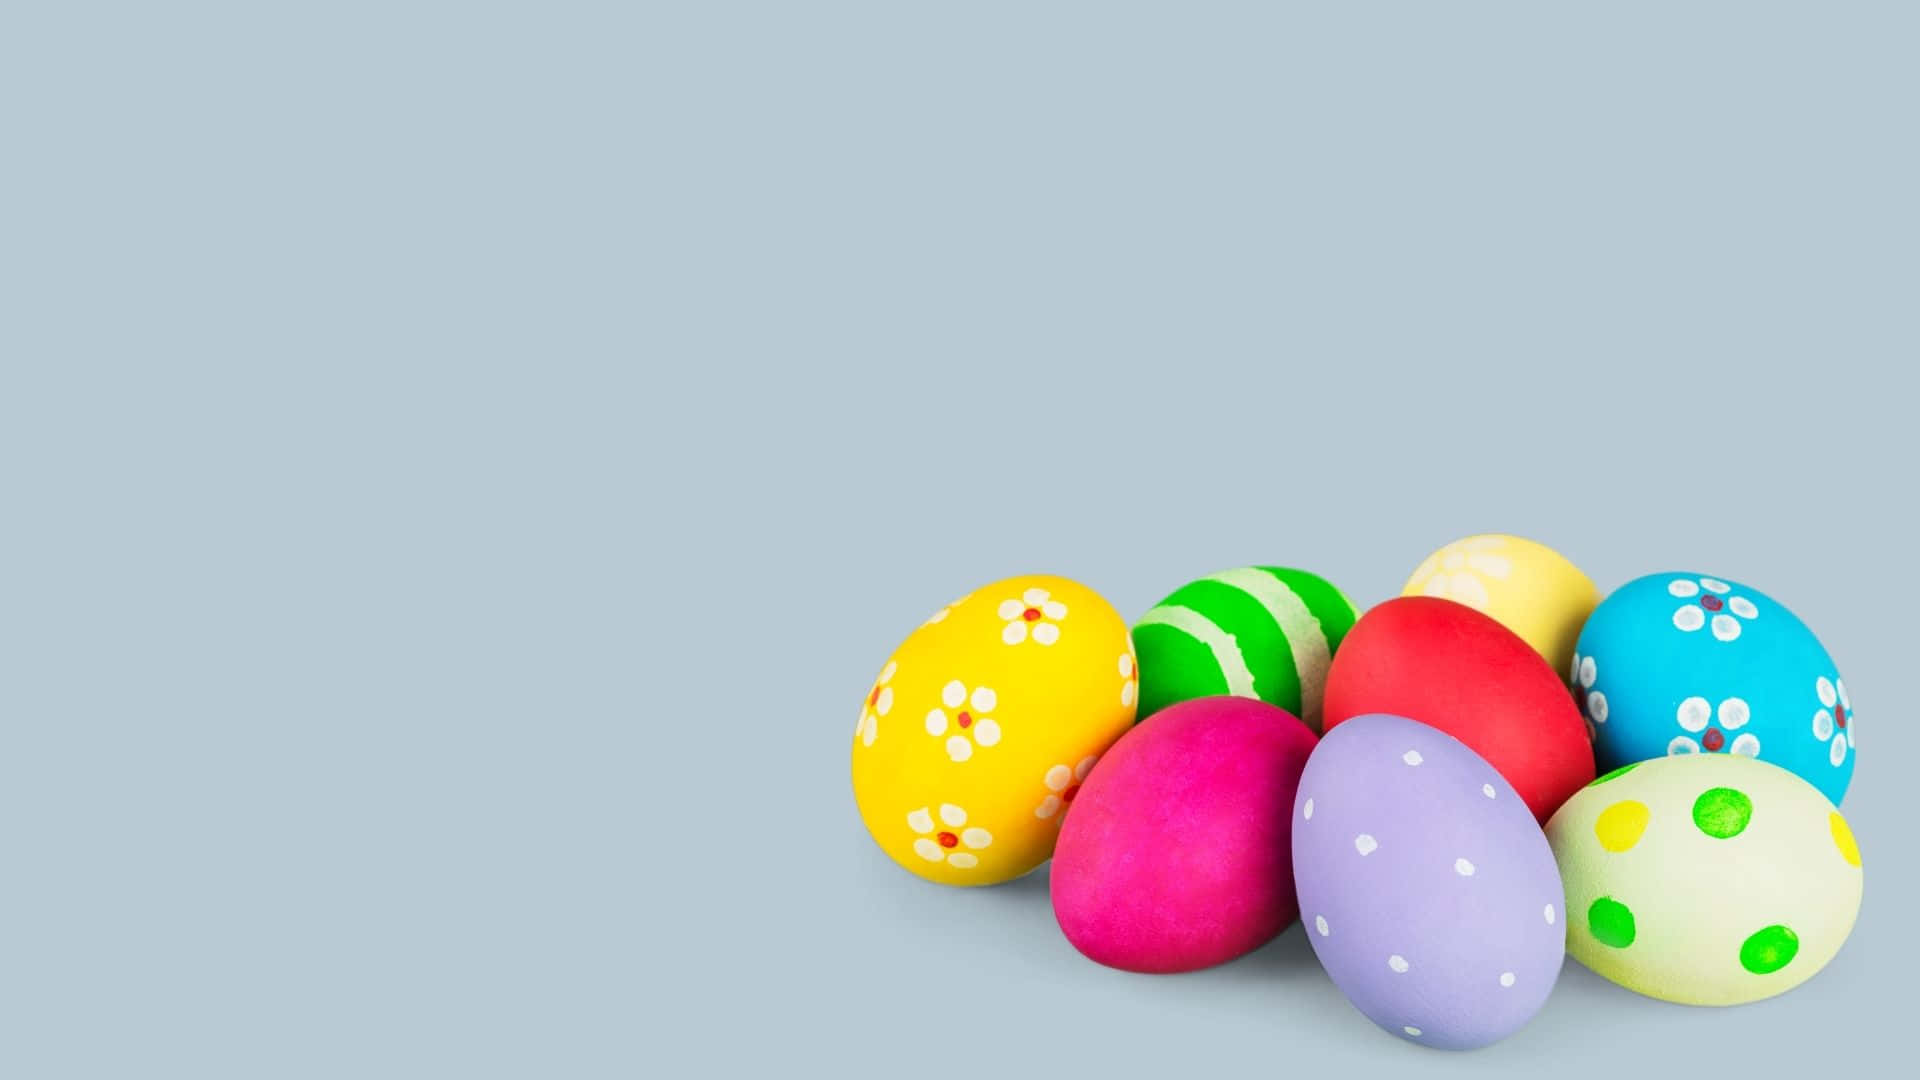 "Cool and Colorful Easter Eggs!" Wallpaper